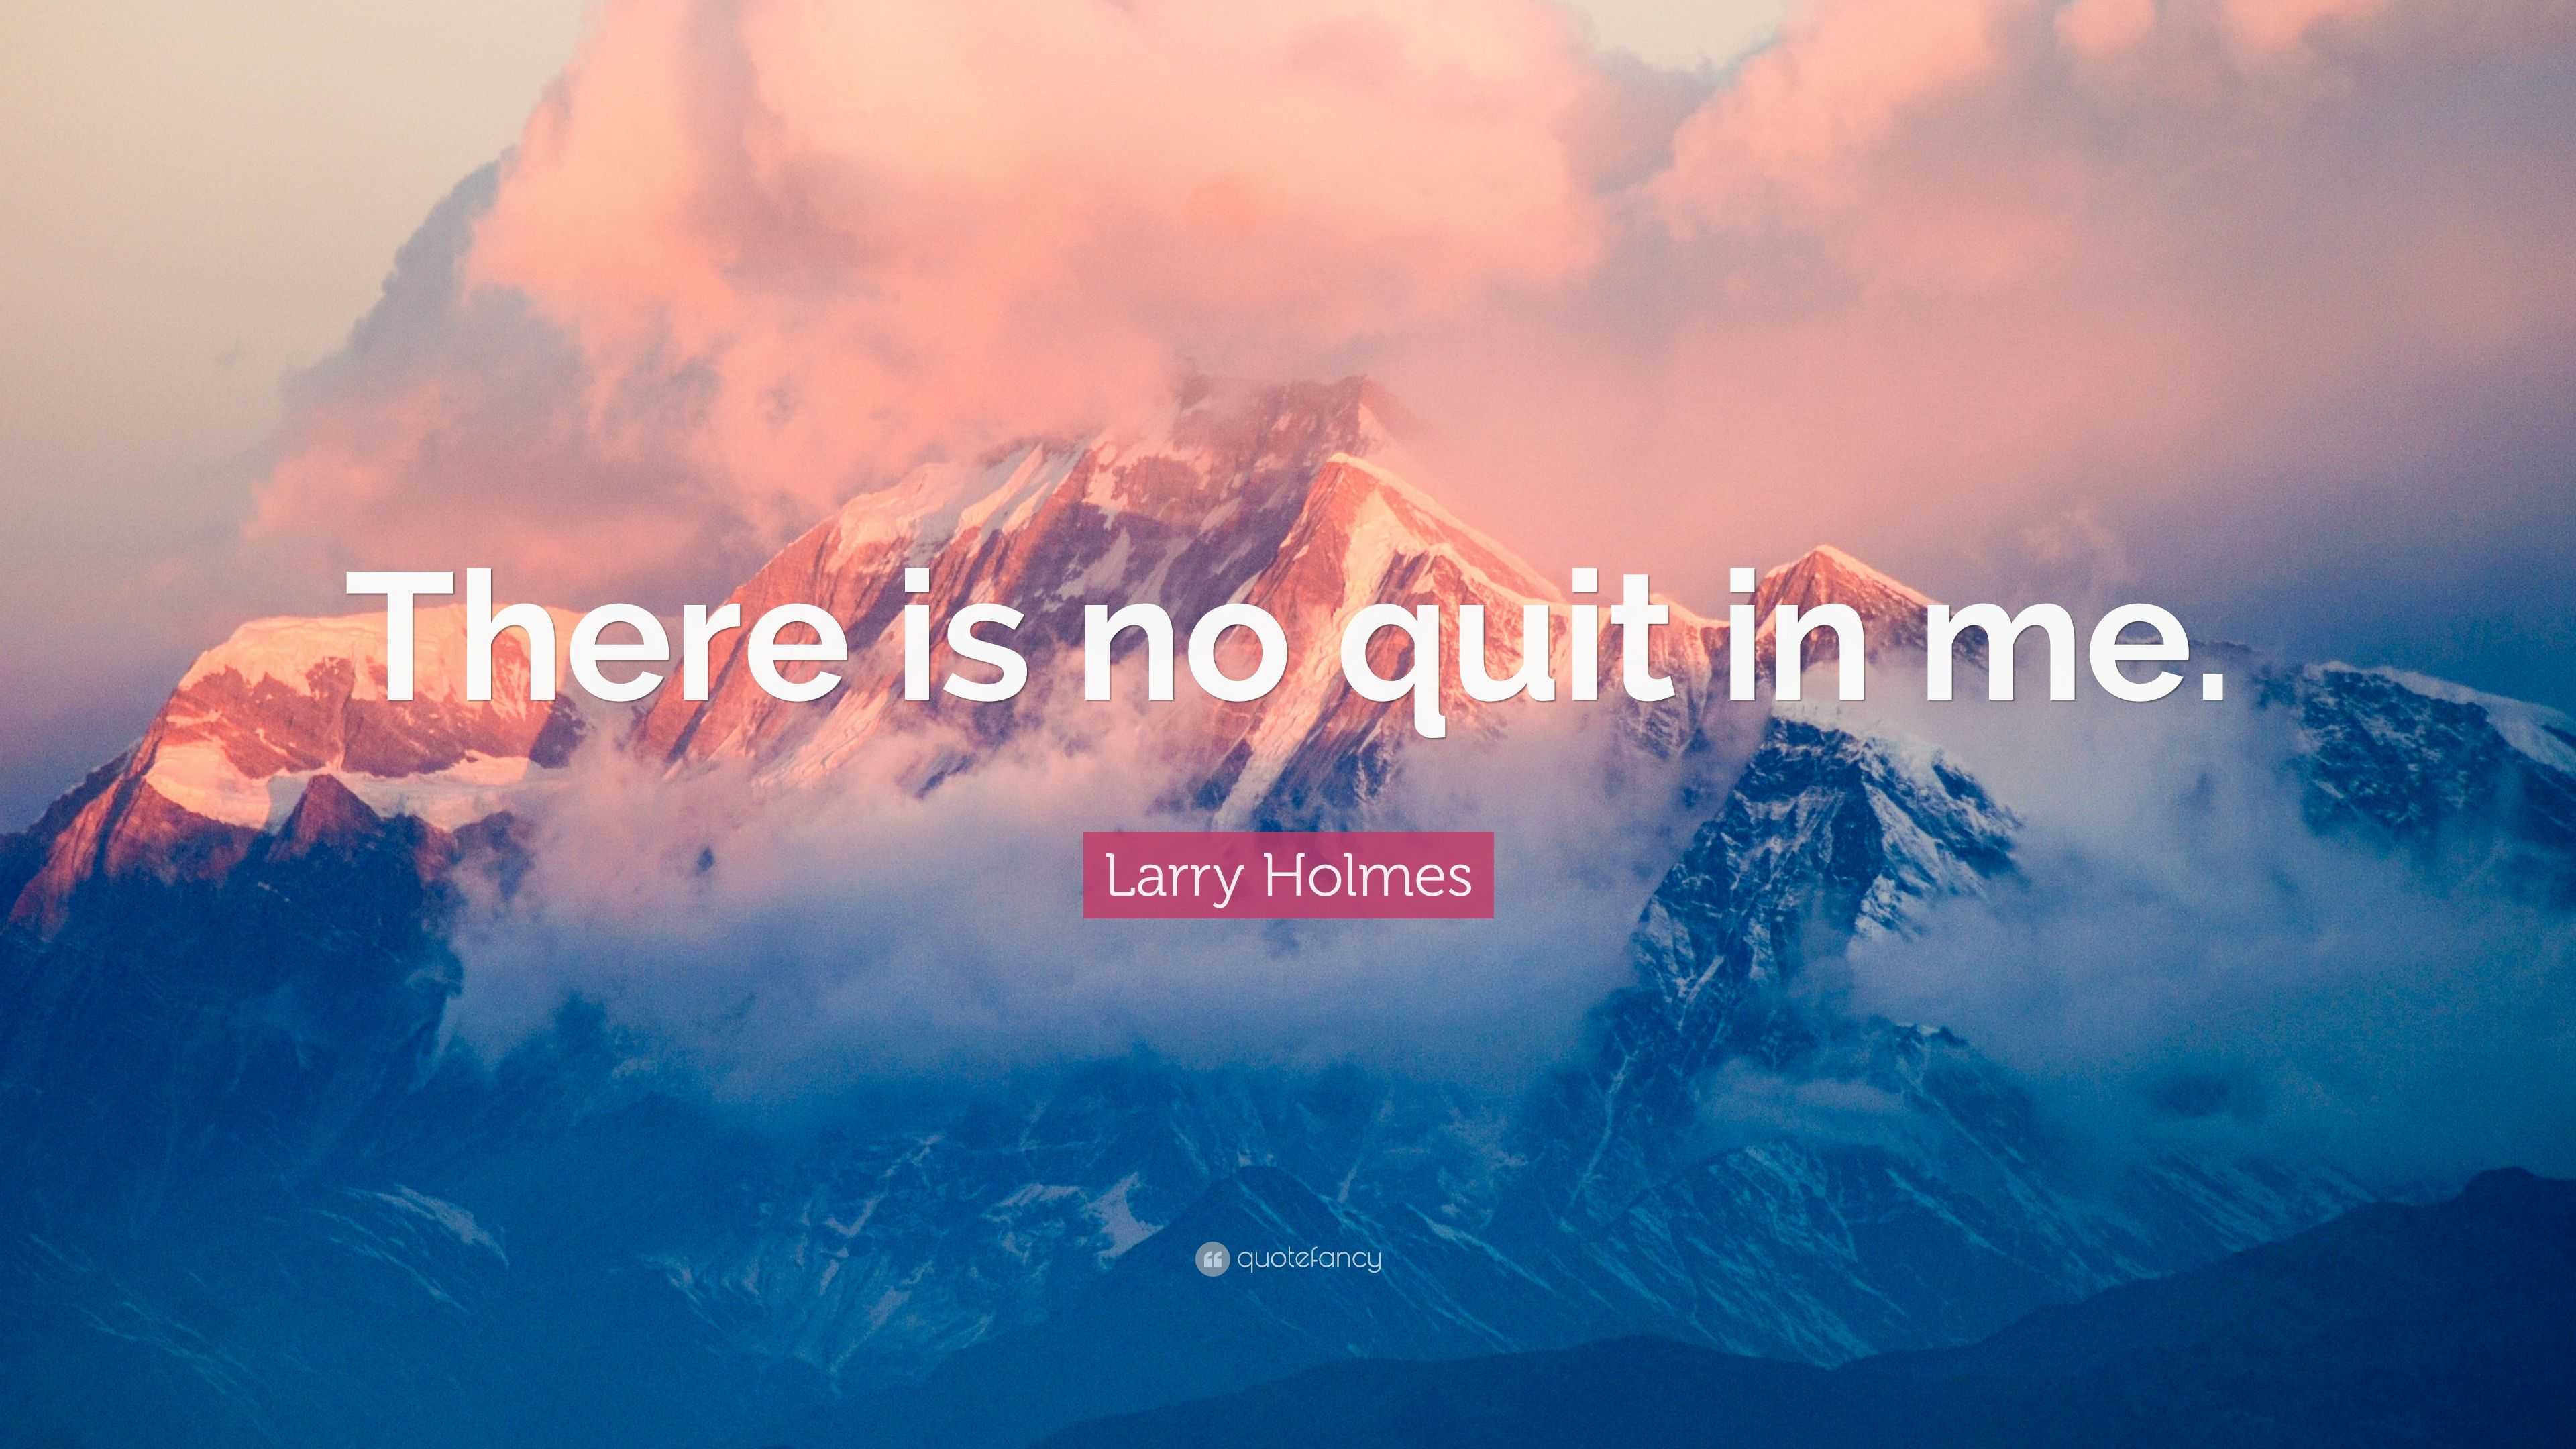 Larry Holmes Quote: “There is no quit in me.”